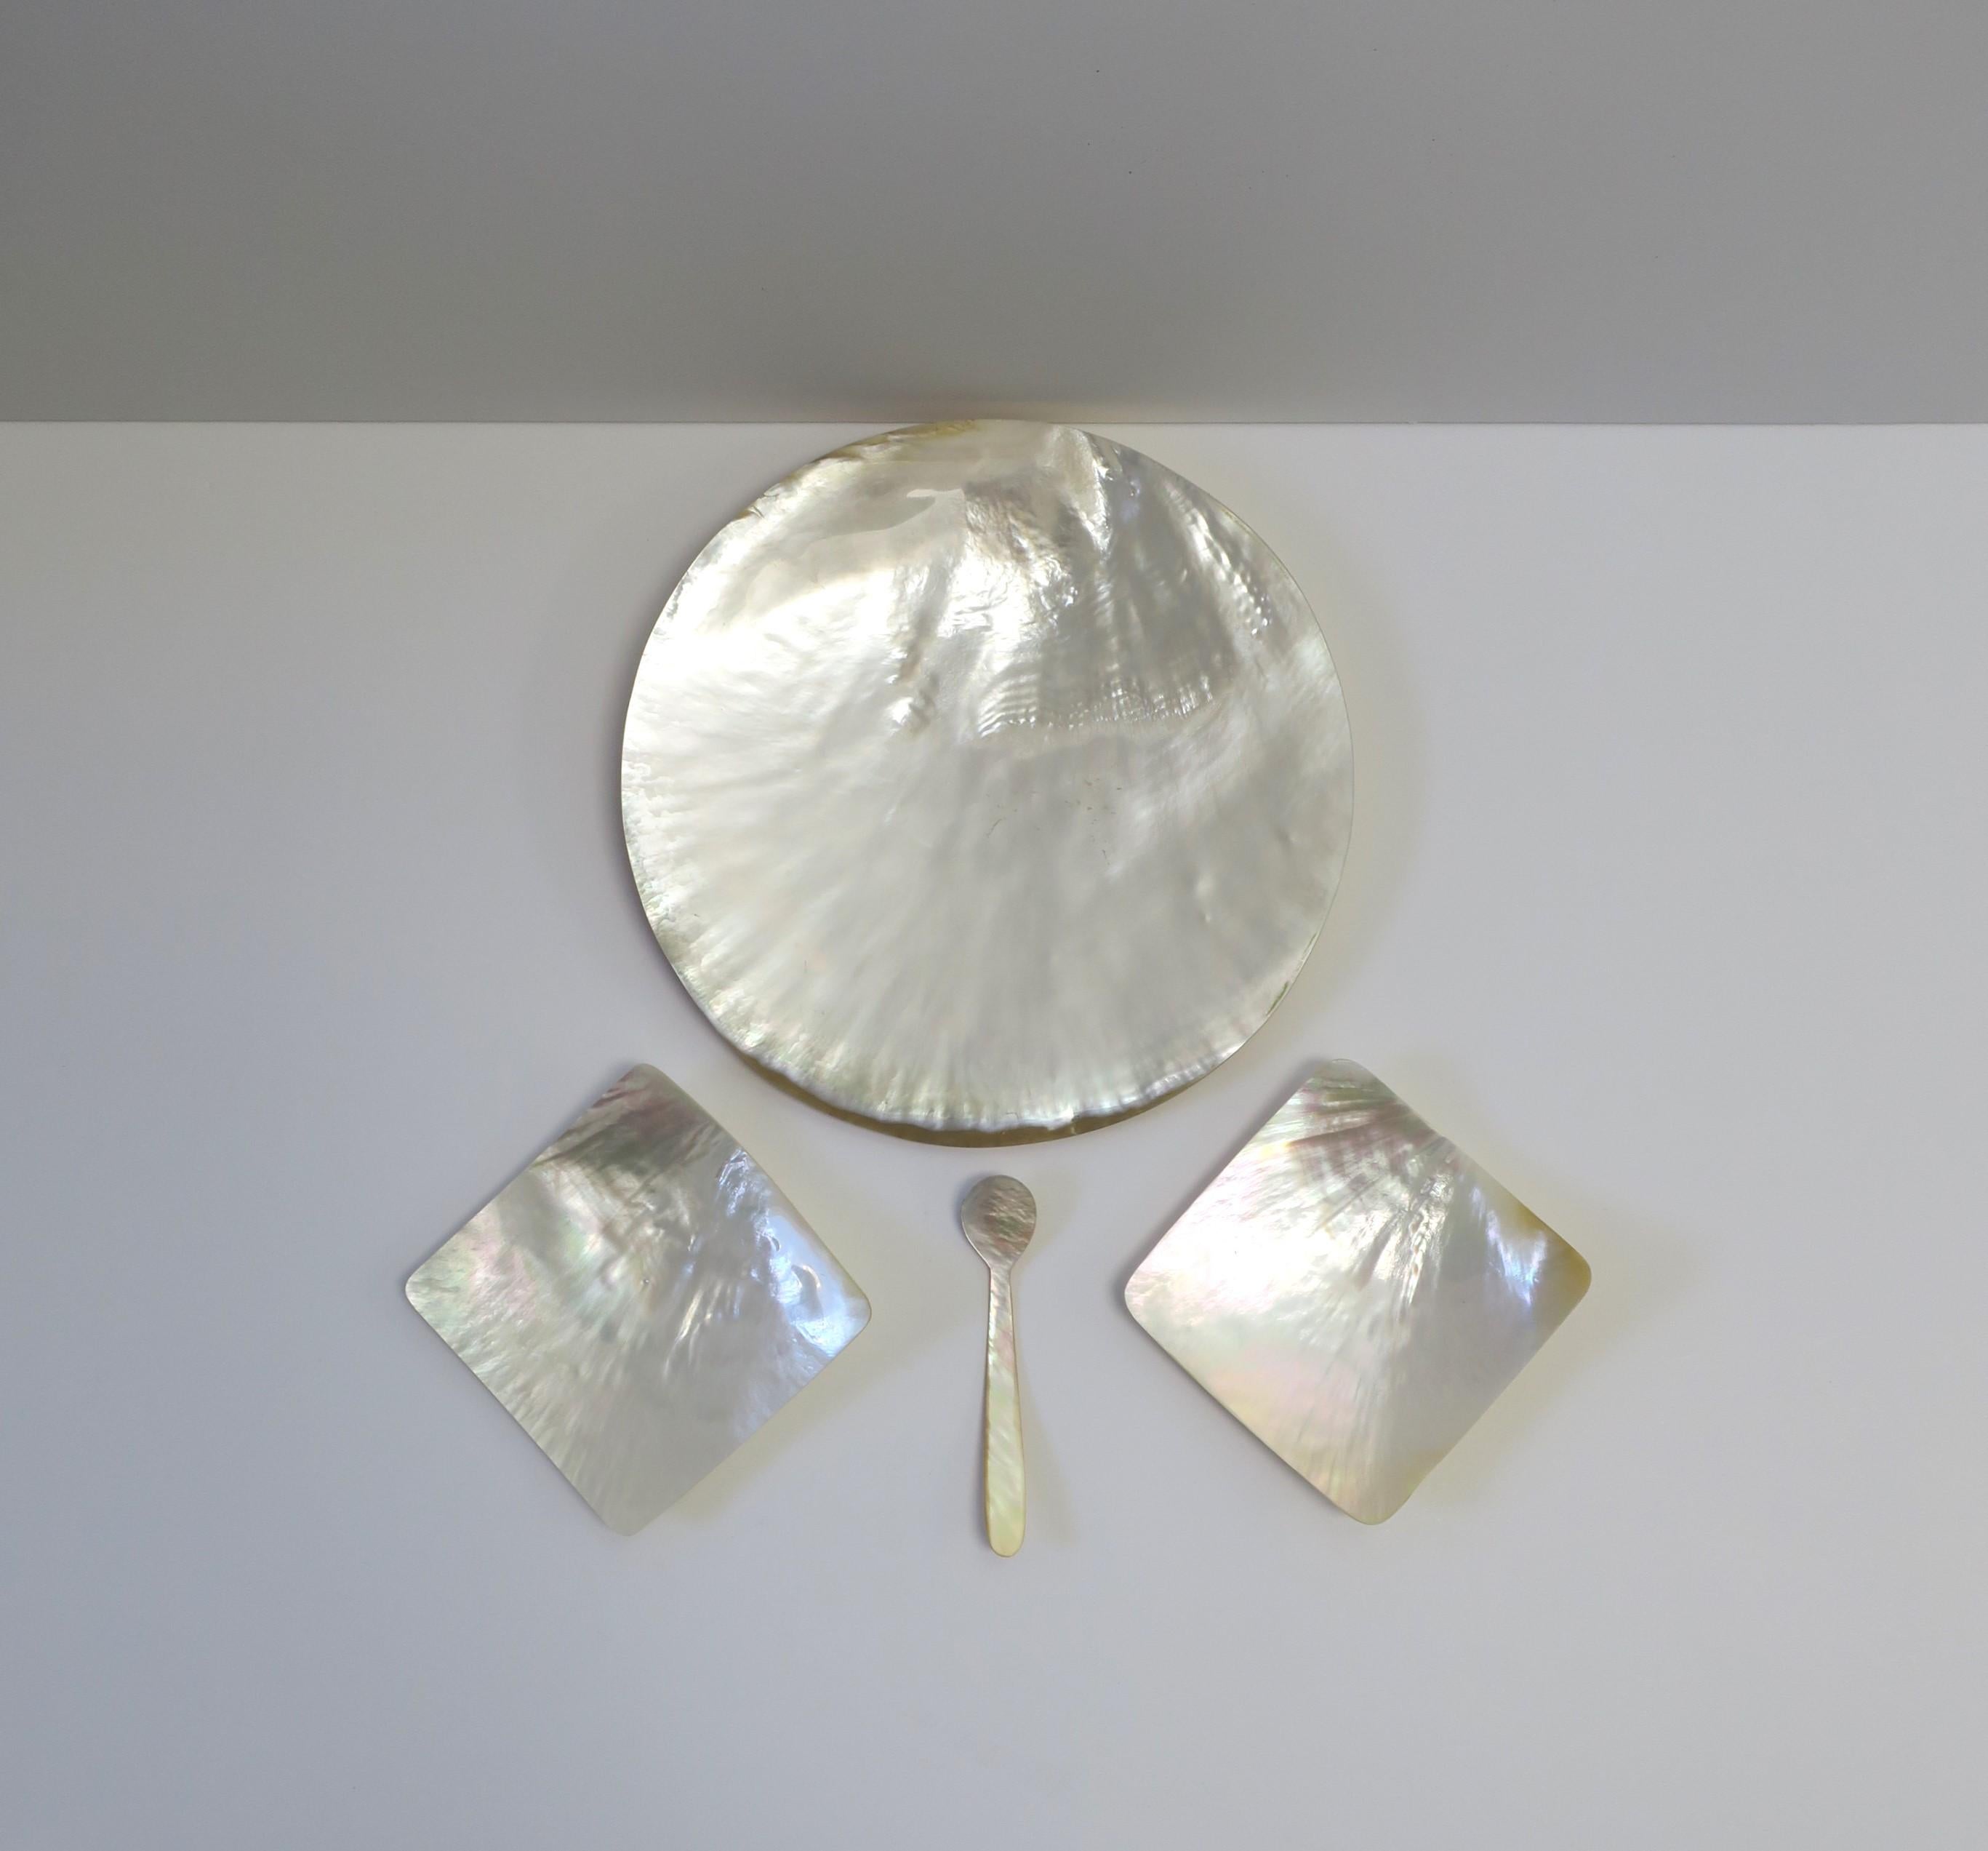 A beautiful Mother of Pearl caviar dish and spoon set, circa 20th century. This Mother-of-Pearl set includes four (4) pieces; 1 round dish, 2 square dishes, and 1 spoon. 

Dimensions: 
Round dish: 8.44